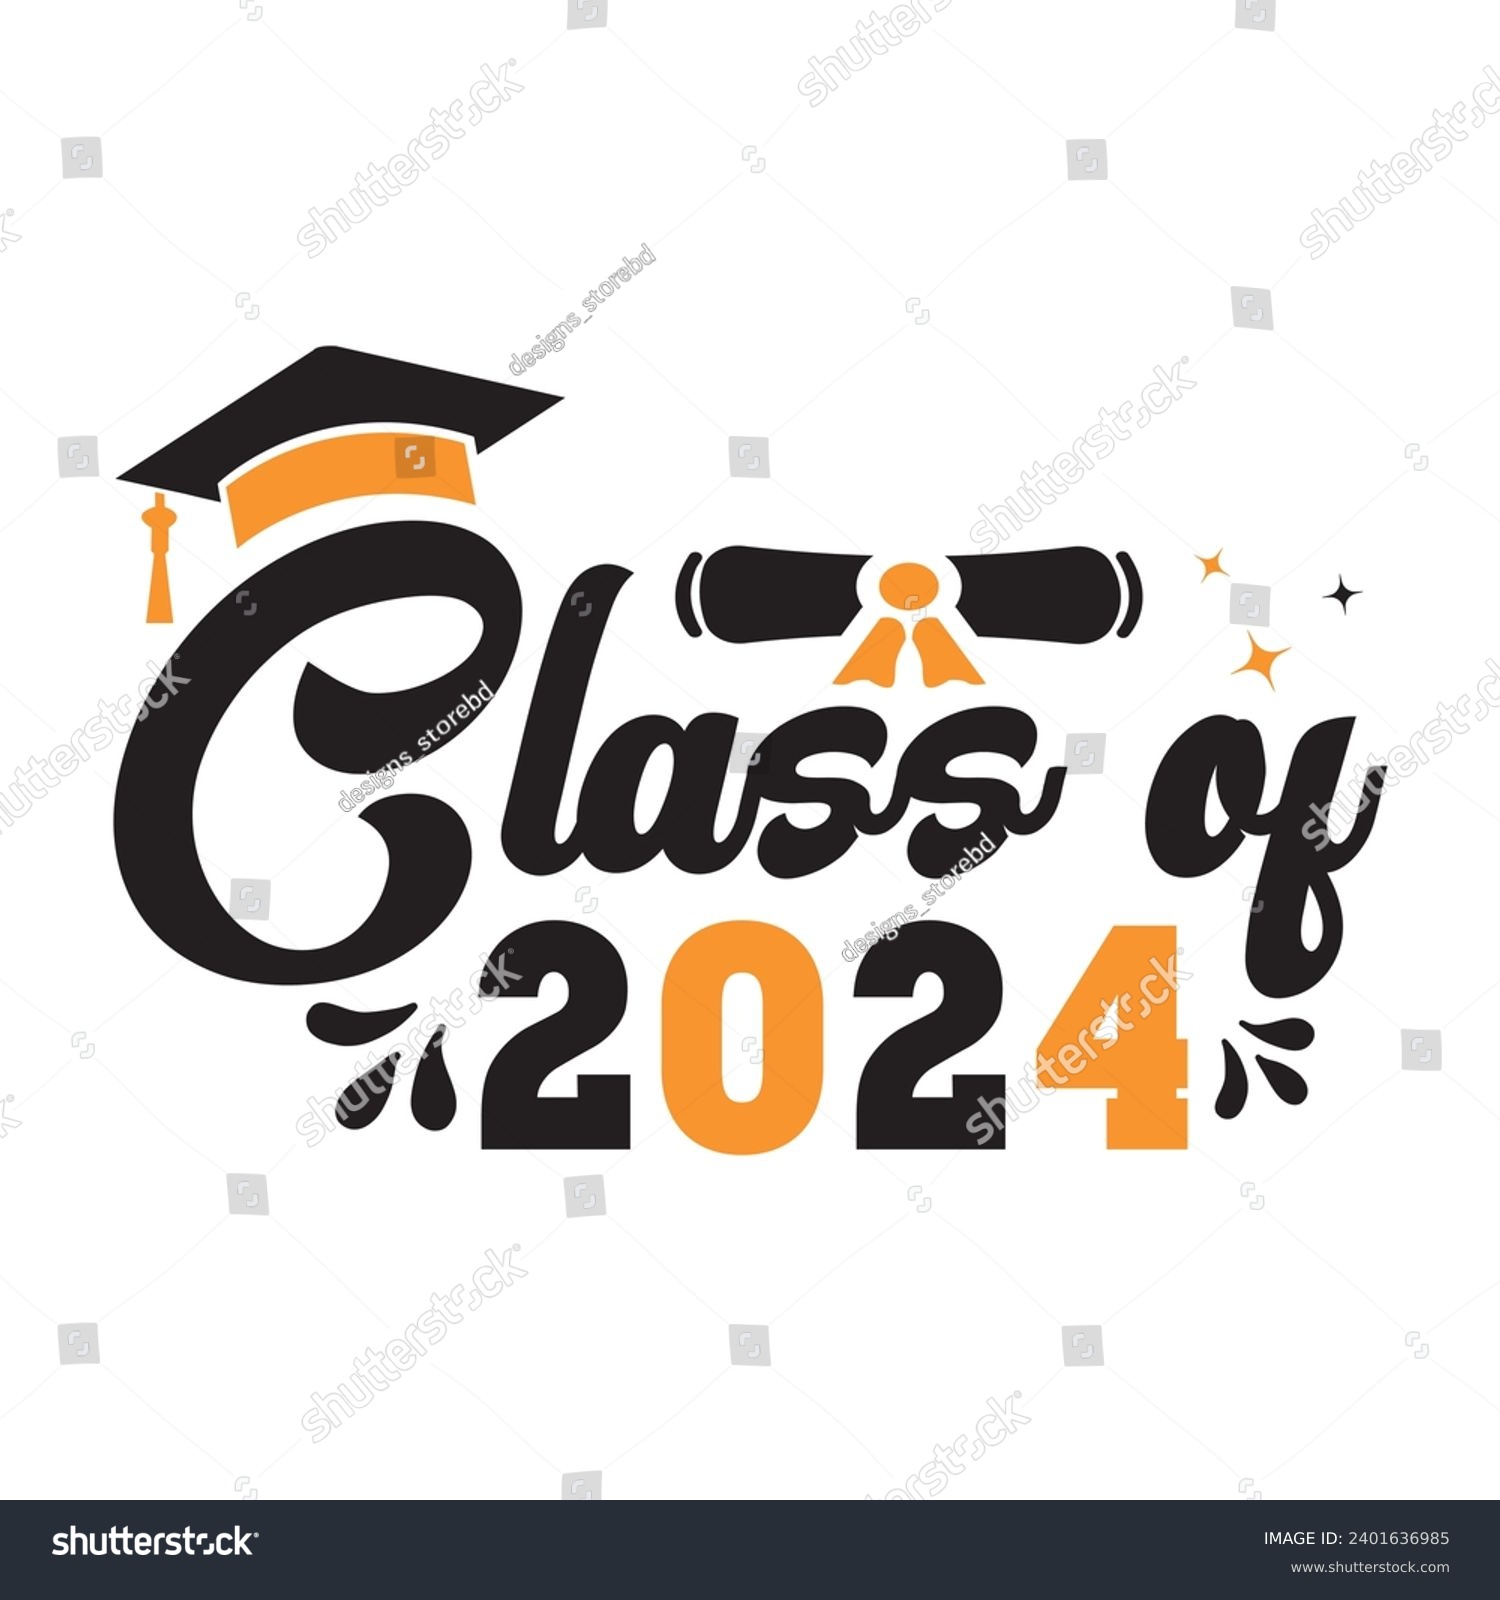 SVG of Class of 2024,Graduation quotes,Class of 2024 Graduation design Bundle,silhouette,Graduation cap,T shirt Calligraphy phrase for Christmas,Hand drawn lettering for Xmas greetings,Graduation 2024 svg